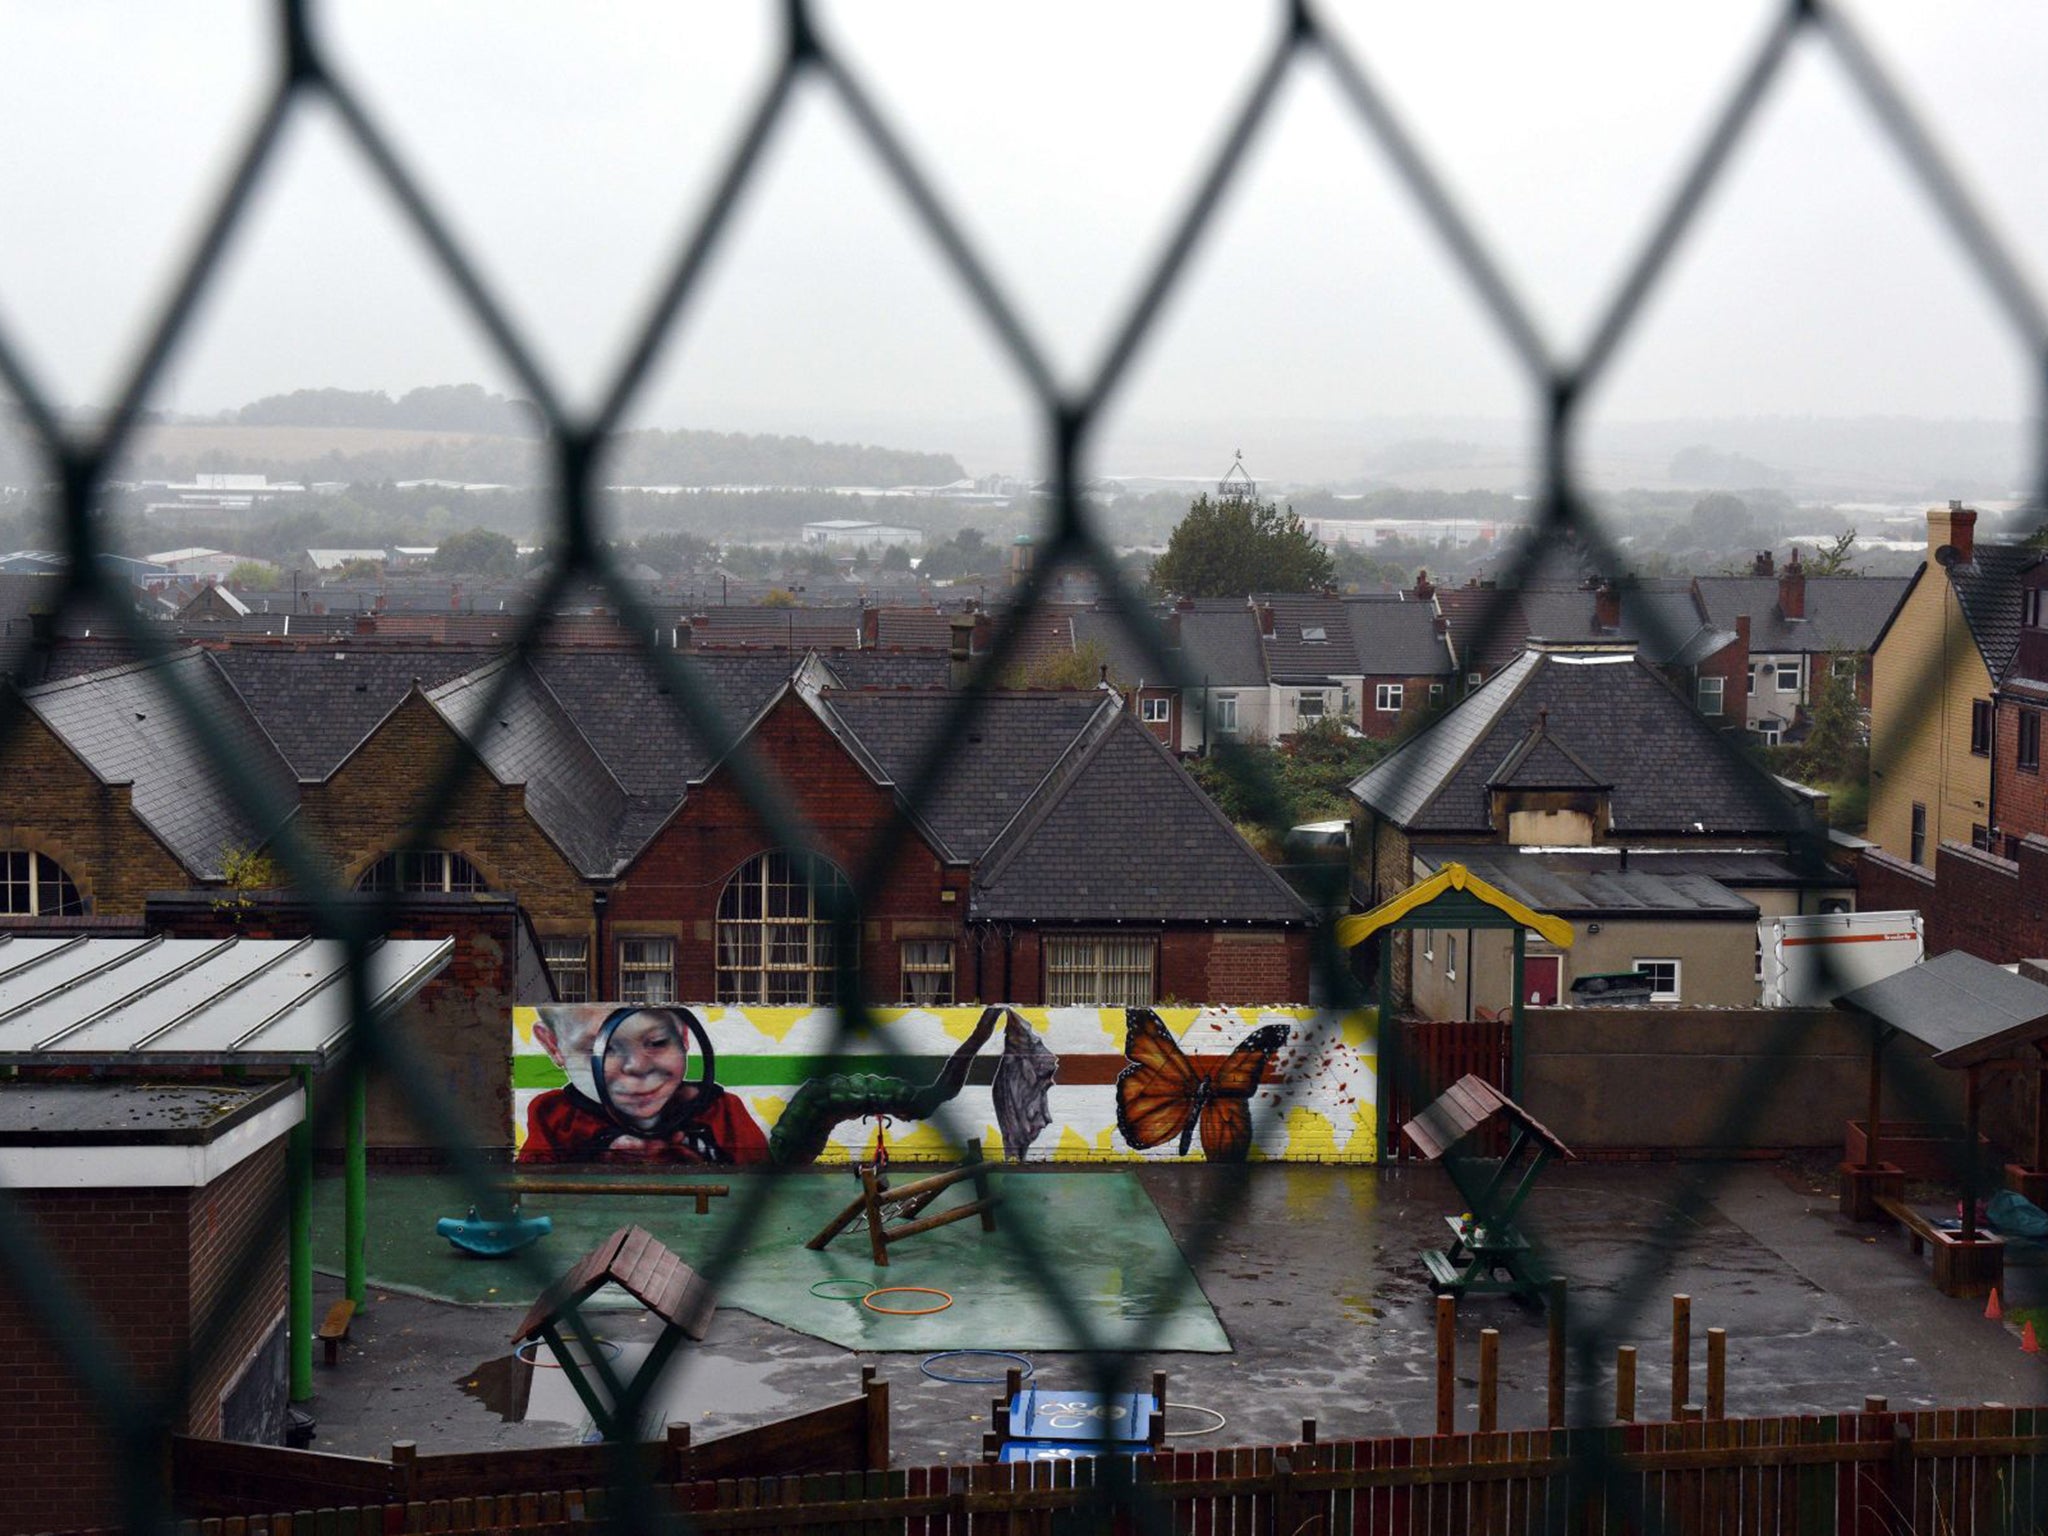 Hundreds of children were abused in Rotherham